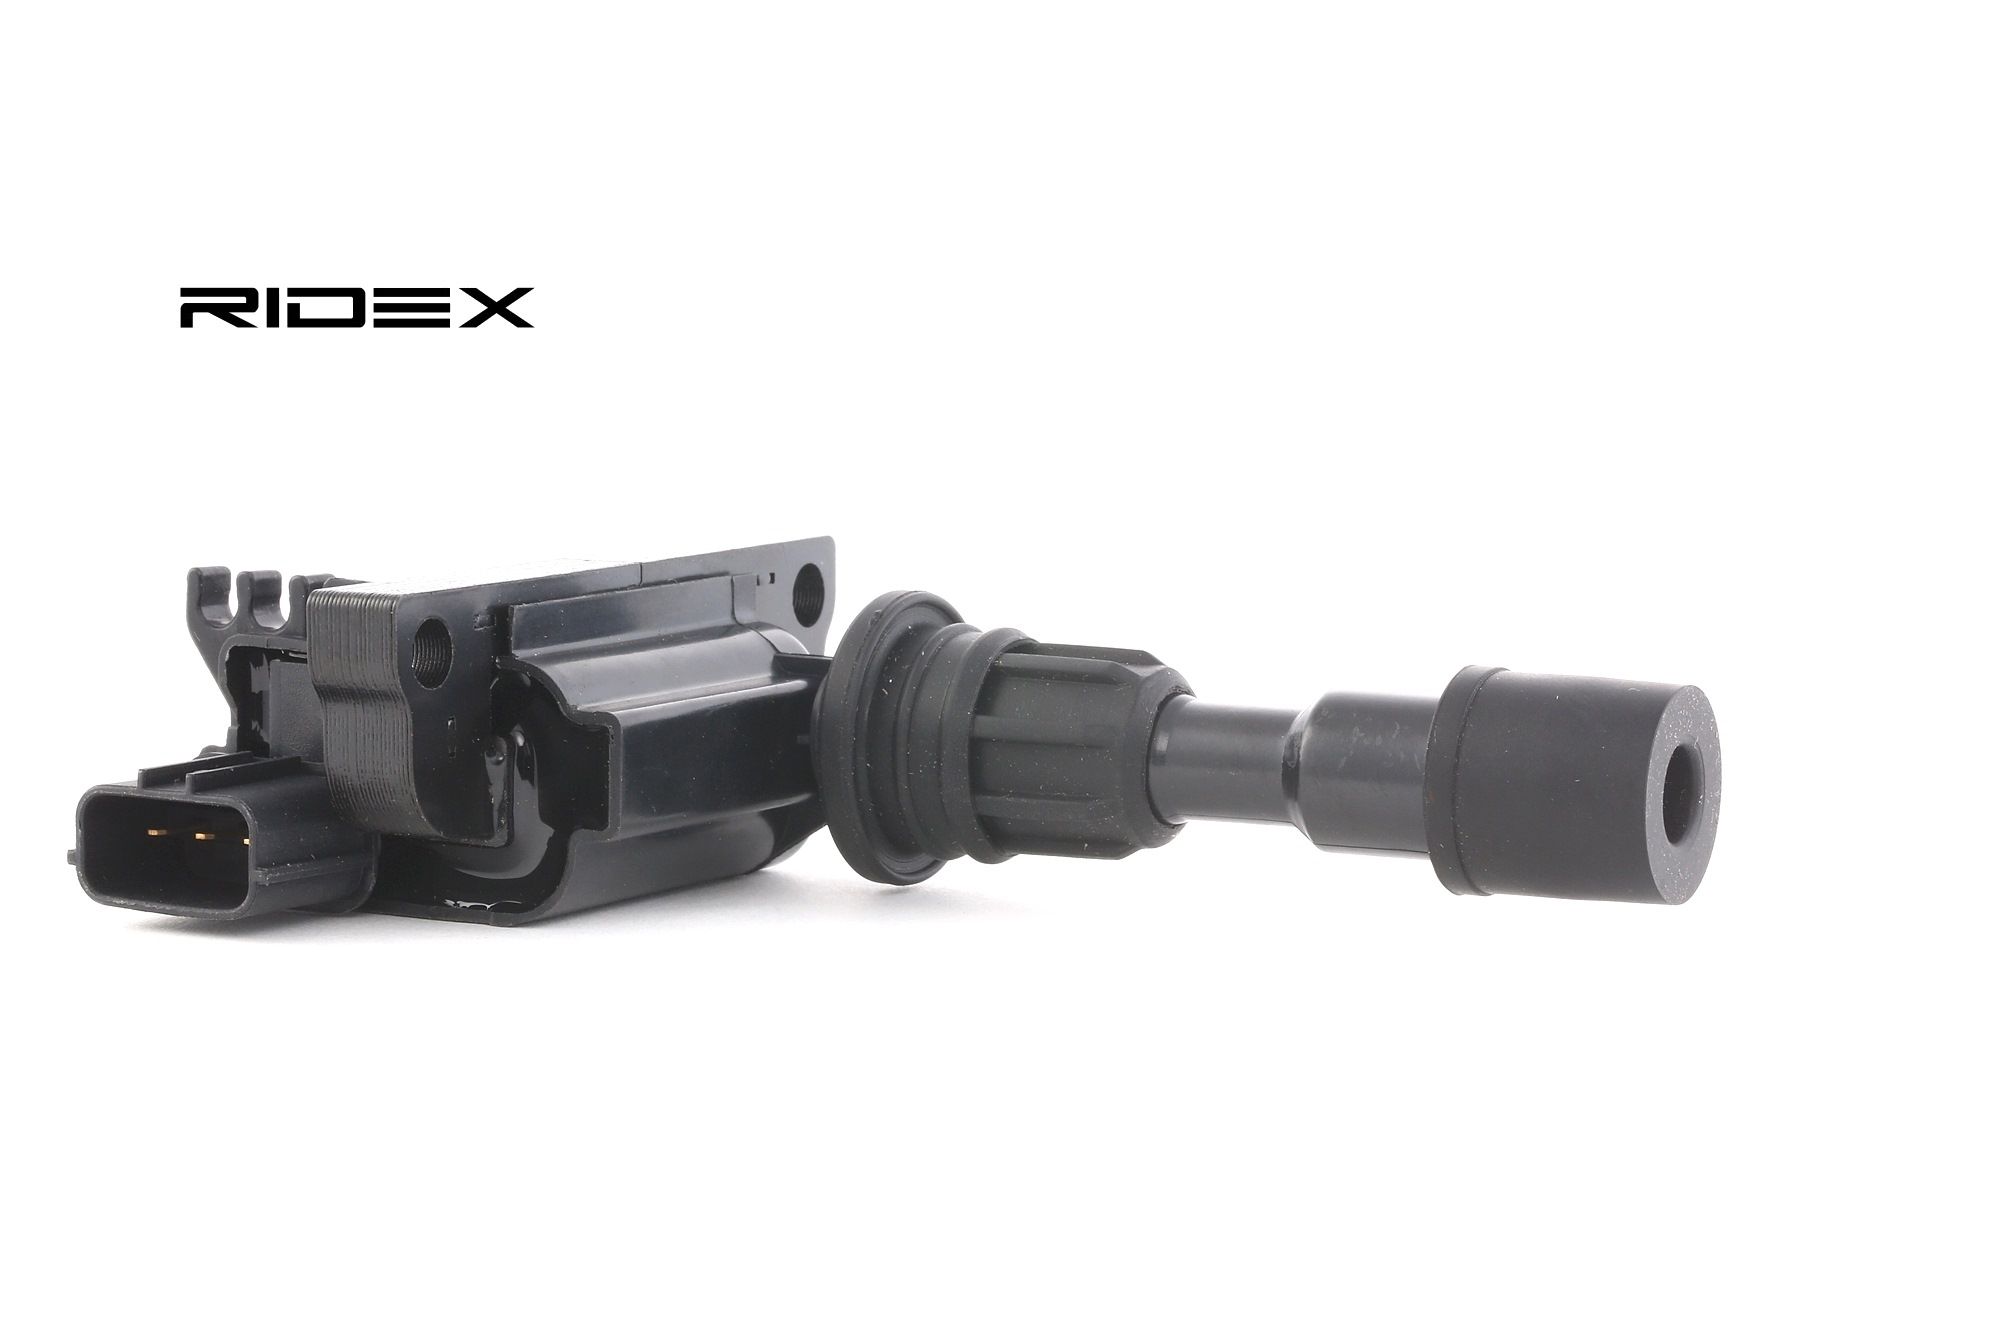 Image of RIDEX Ignition coil MAZDA 689C0097 2503931,DSC1051A,DSC1501 Coil pack,Ignition coil pack,Engine coil,Engine coil pack HEXEXD1501A,ZL0118100,ZL0118100A